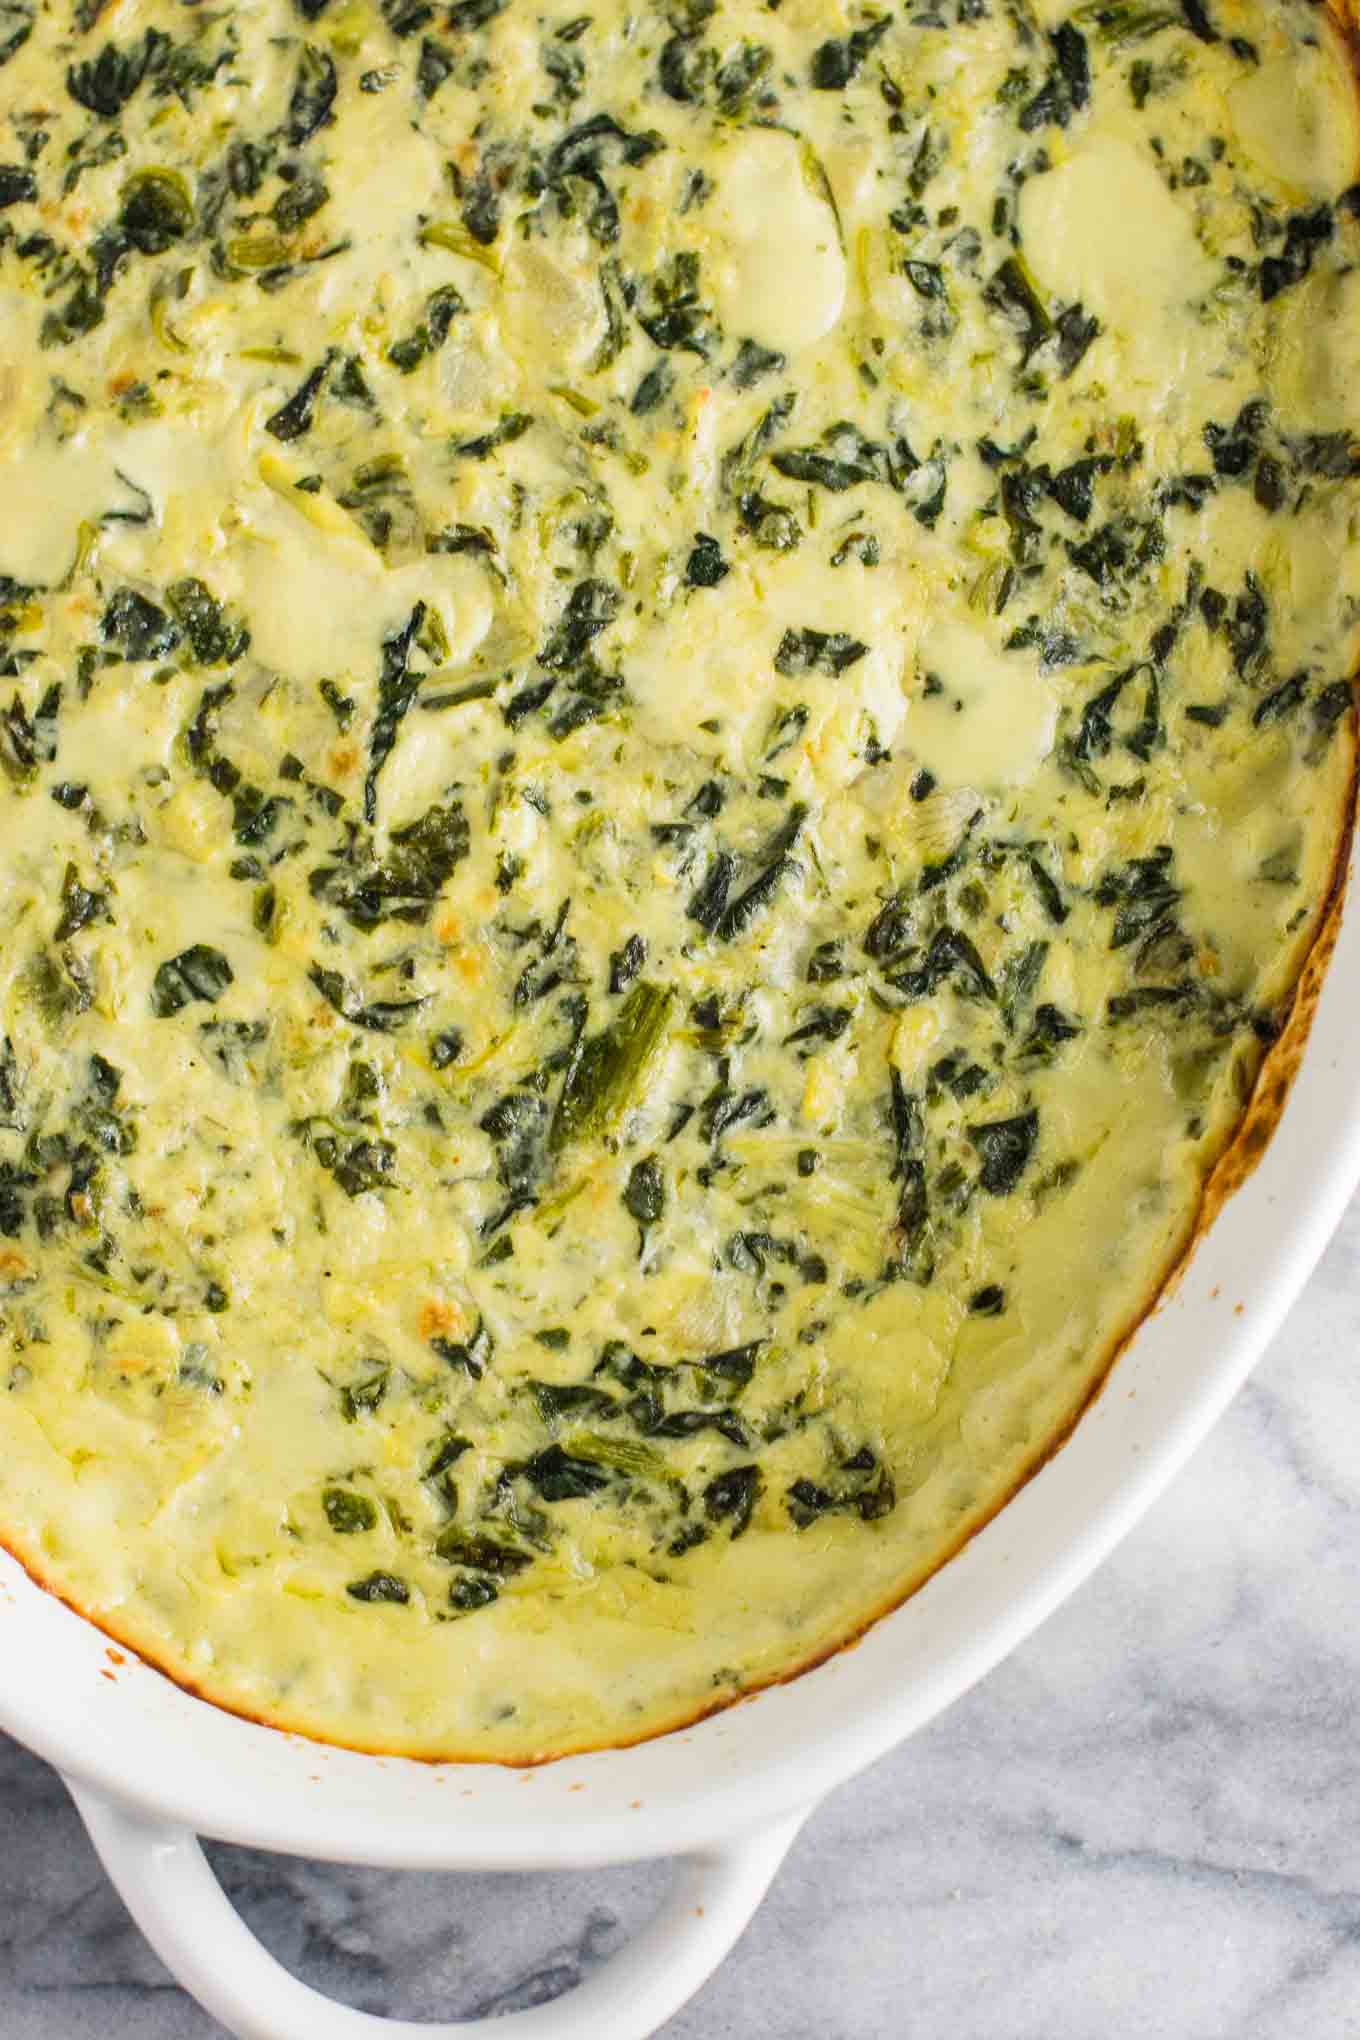 The best creamy spinach and artichoke dip recipe with Havarti and parmesan cheese. This is a hit every time I make it! #spinachartichokedip #appetizer #spinachdip #vegetarian #havarti #parmesan #dips